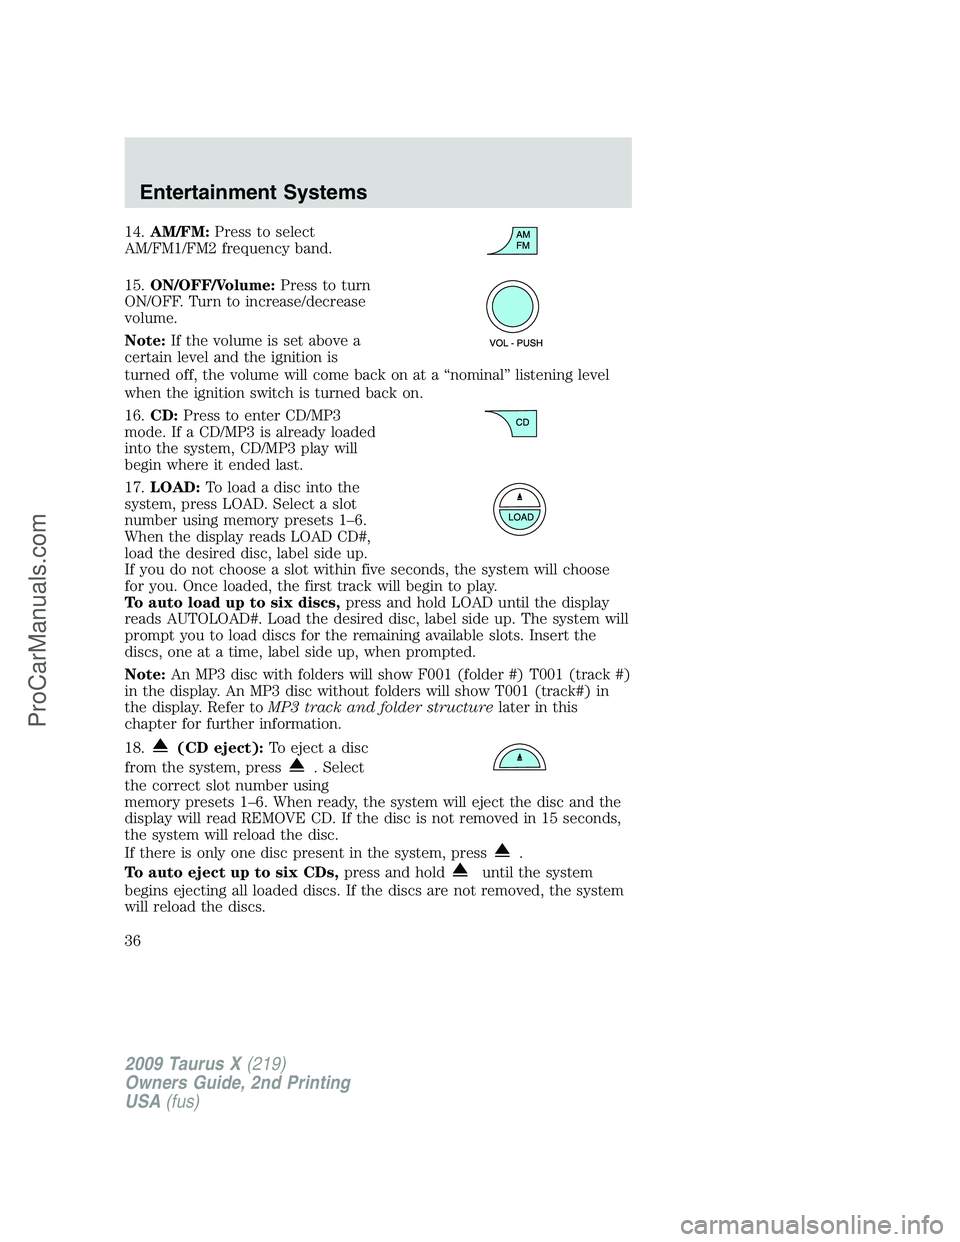 FORD FREESTYLE 2009  Owners Manual 14.AM/FM:Press to select
AM/FM1/FM2 frequency band.
15.ON/OFF/Volume:Press to turn
ON/OFF. Turn to increase/decrease
volume.
Note:If the volume is set above a
certain level and the ignition is
turned 